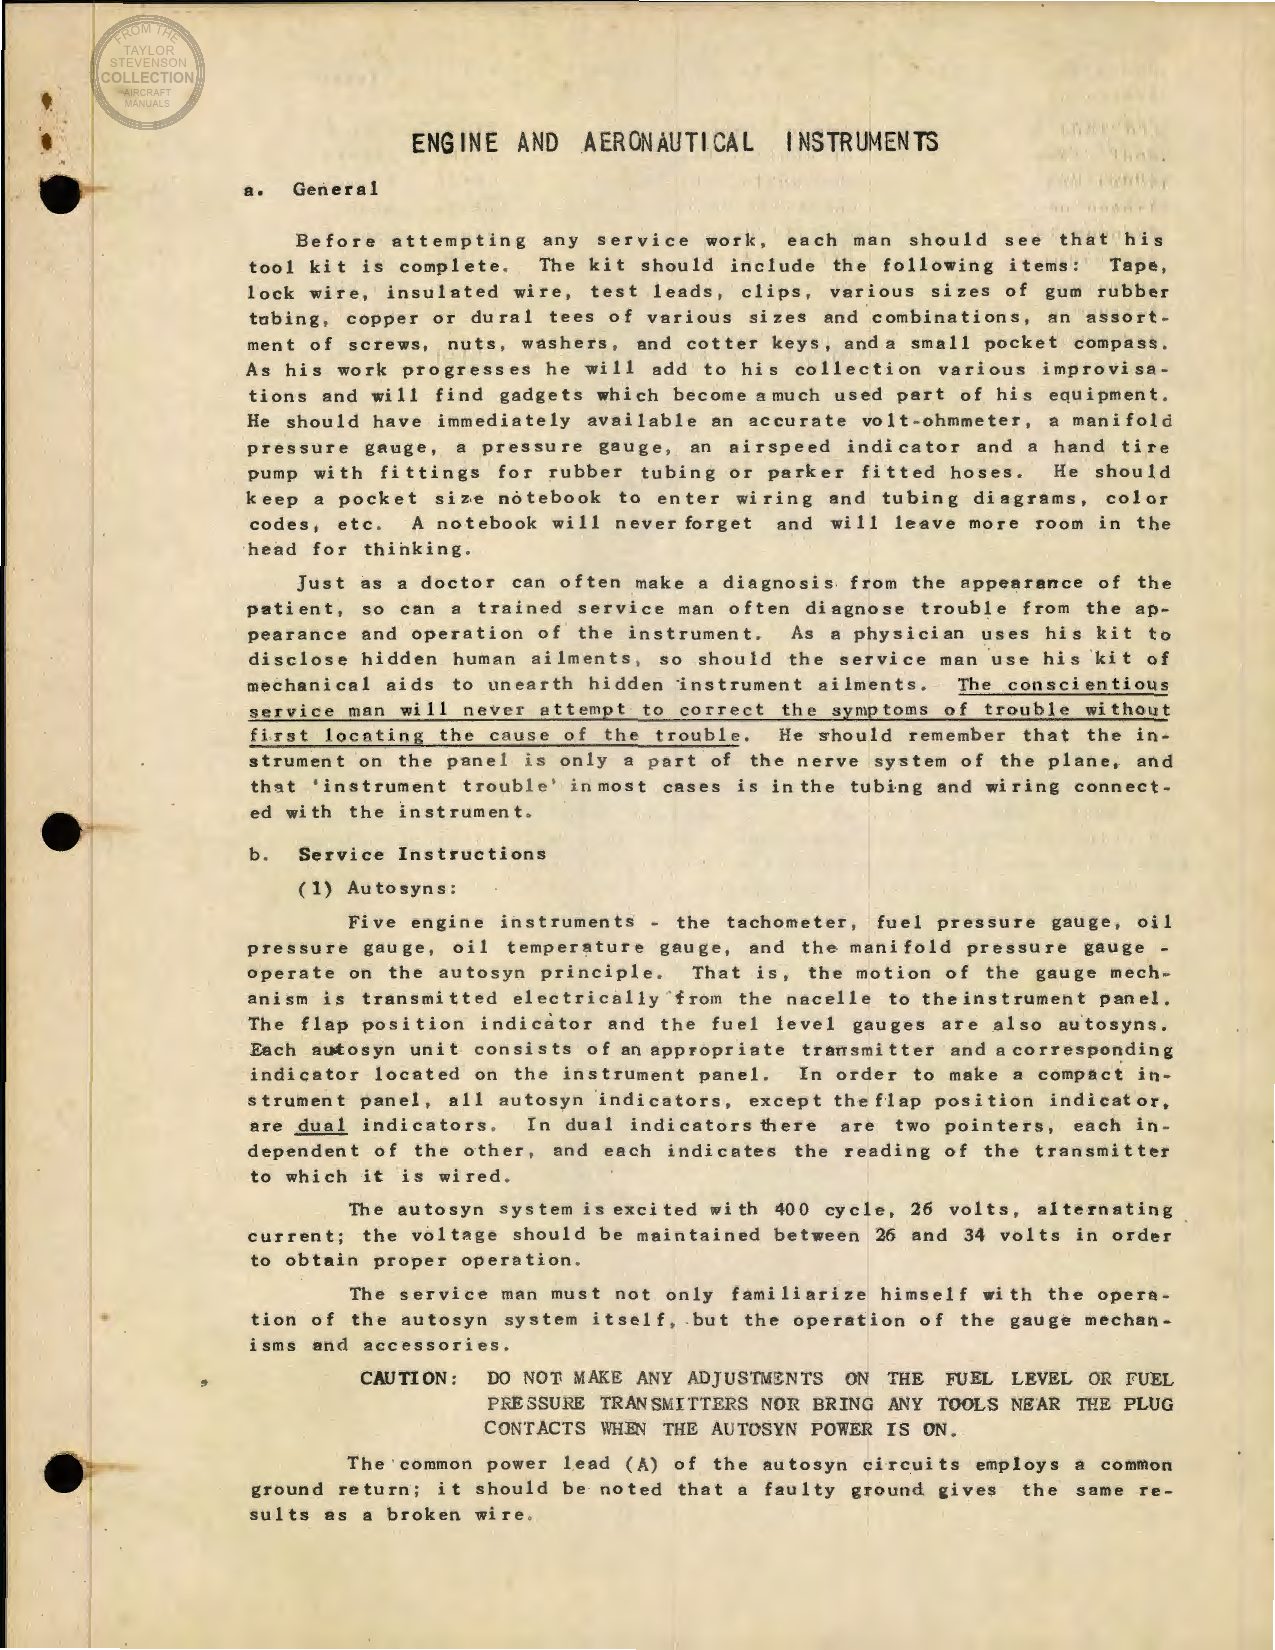 Sample page 1 from AirCorps Library document: Engine and Aeronautical Instruments for the B-17